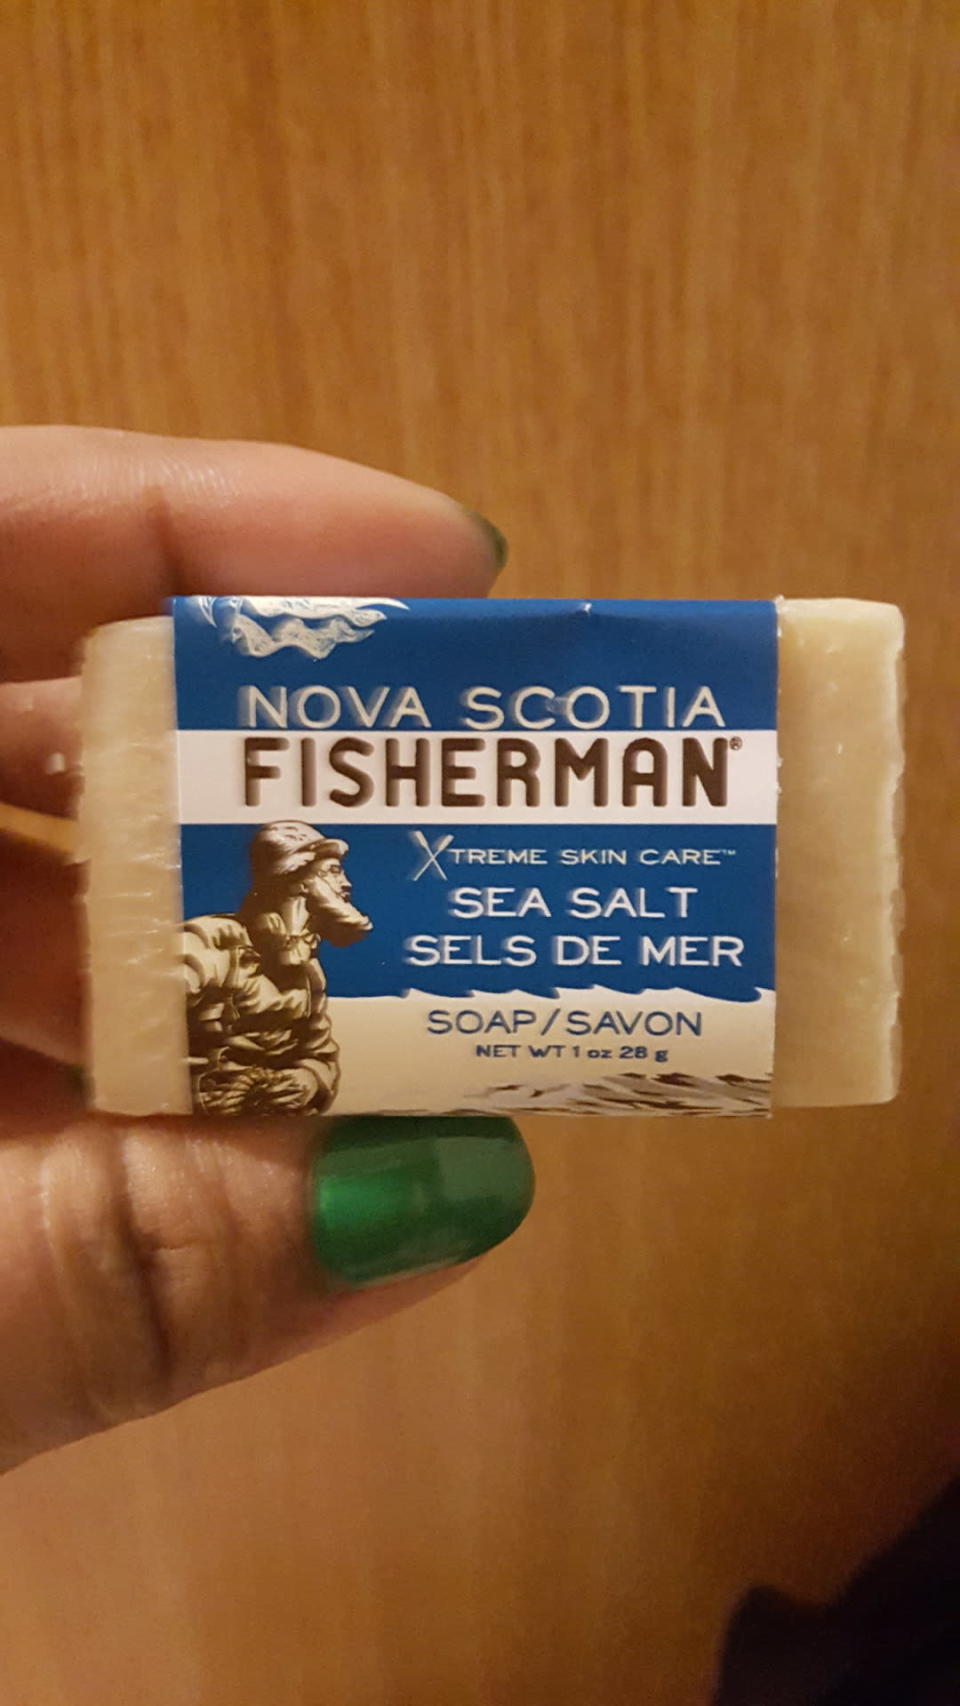 Nova Scotia Fisherman Xtreme Skin Care, Sea Salt Soap: I really wanted to like this one because it’s Canadian and made with all-natural products… but I’m not a huge fan of bar soap to begin with and I really did not care for this product. It made my skin feel a bit waxy, wasn’t particularly moisturizing and had a bit of a boring neutral scent. 